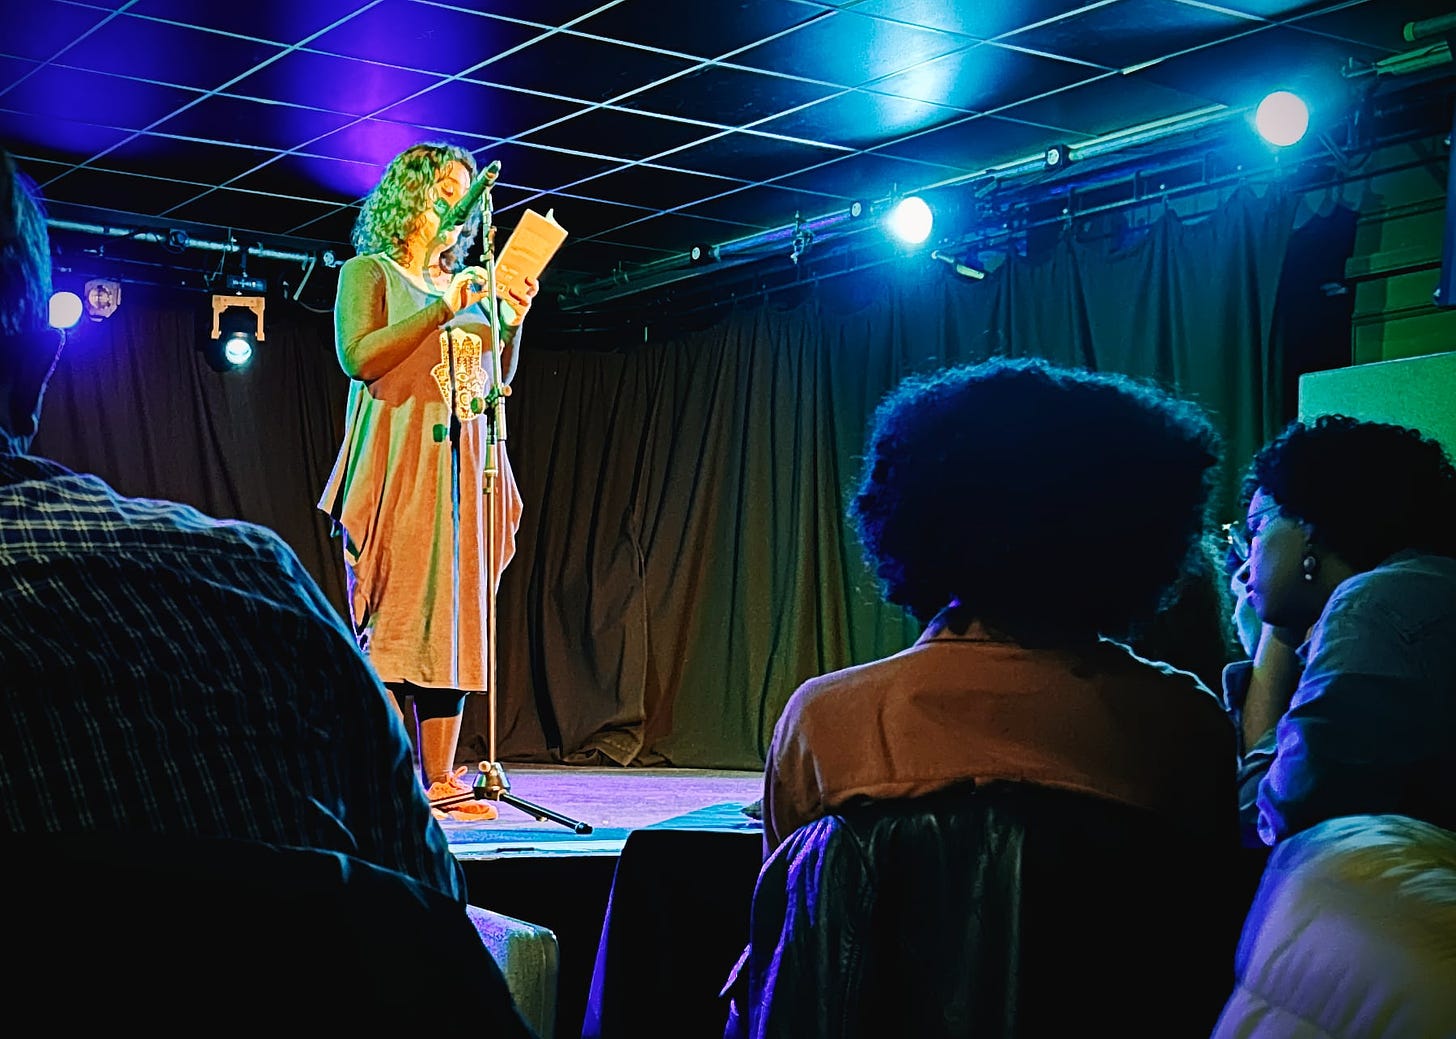 An image capturing a live performance by Sara Shaarawi, who is presenting an excerpt from her play 'Sister Radio' at The Lemon Tree venue. The performer, positioned on stage with a microphone stand, is reading from a script. The stage lighting casts a vibrant glow around her, accentuating her presence. In the foreground, the audience is attentively listening, with some members visible from the back, creating an intimate atmosphere of engagement between the performer and her audience.